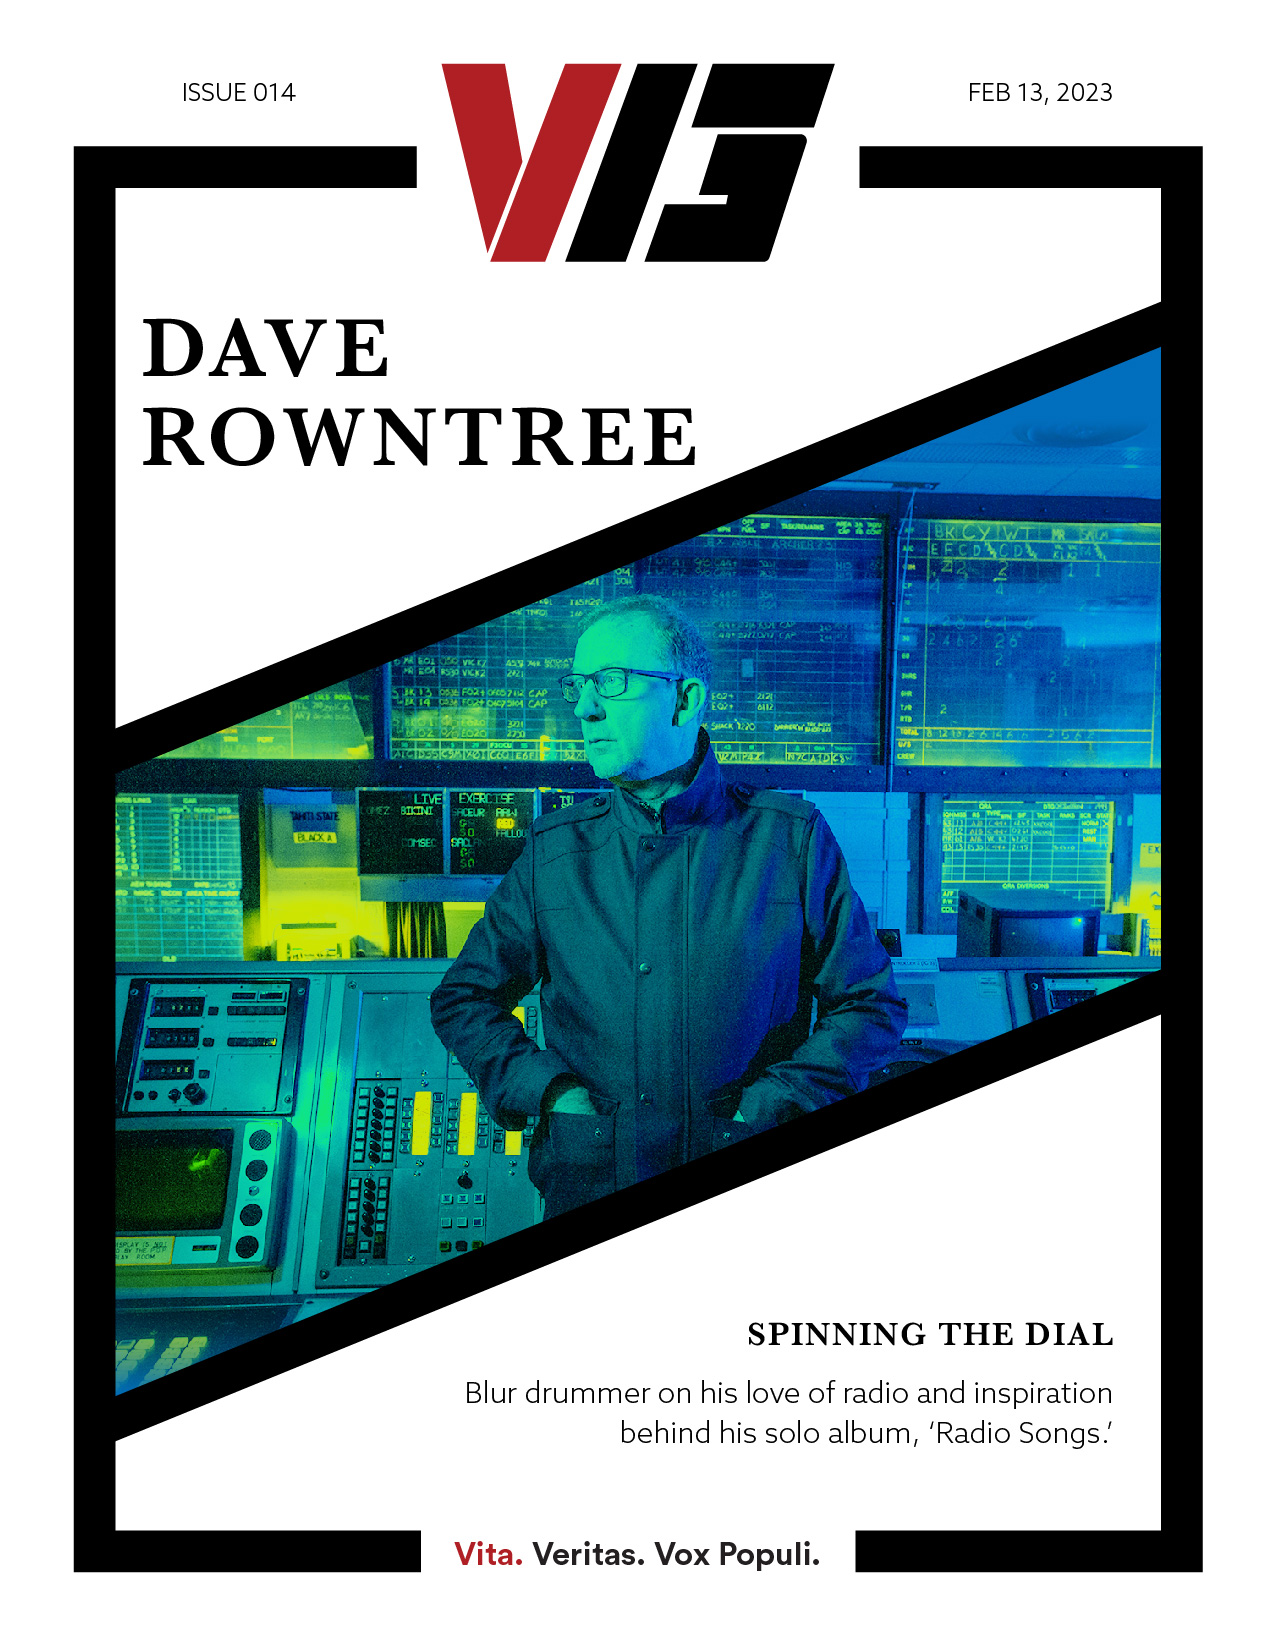 V13 Cover Story 014 - Dave Rowntree - Feb 13, 2023